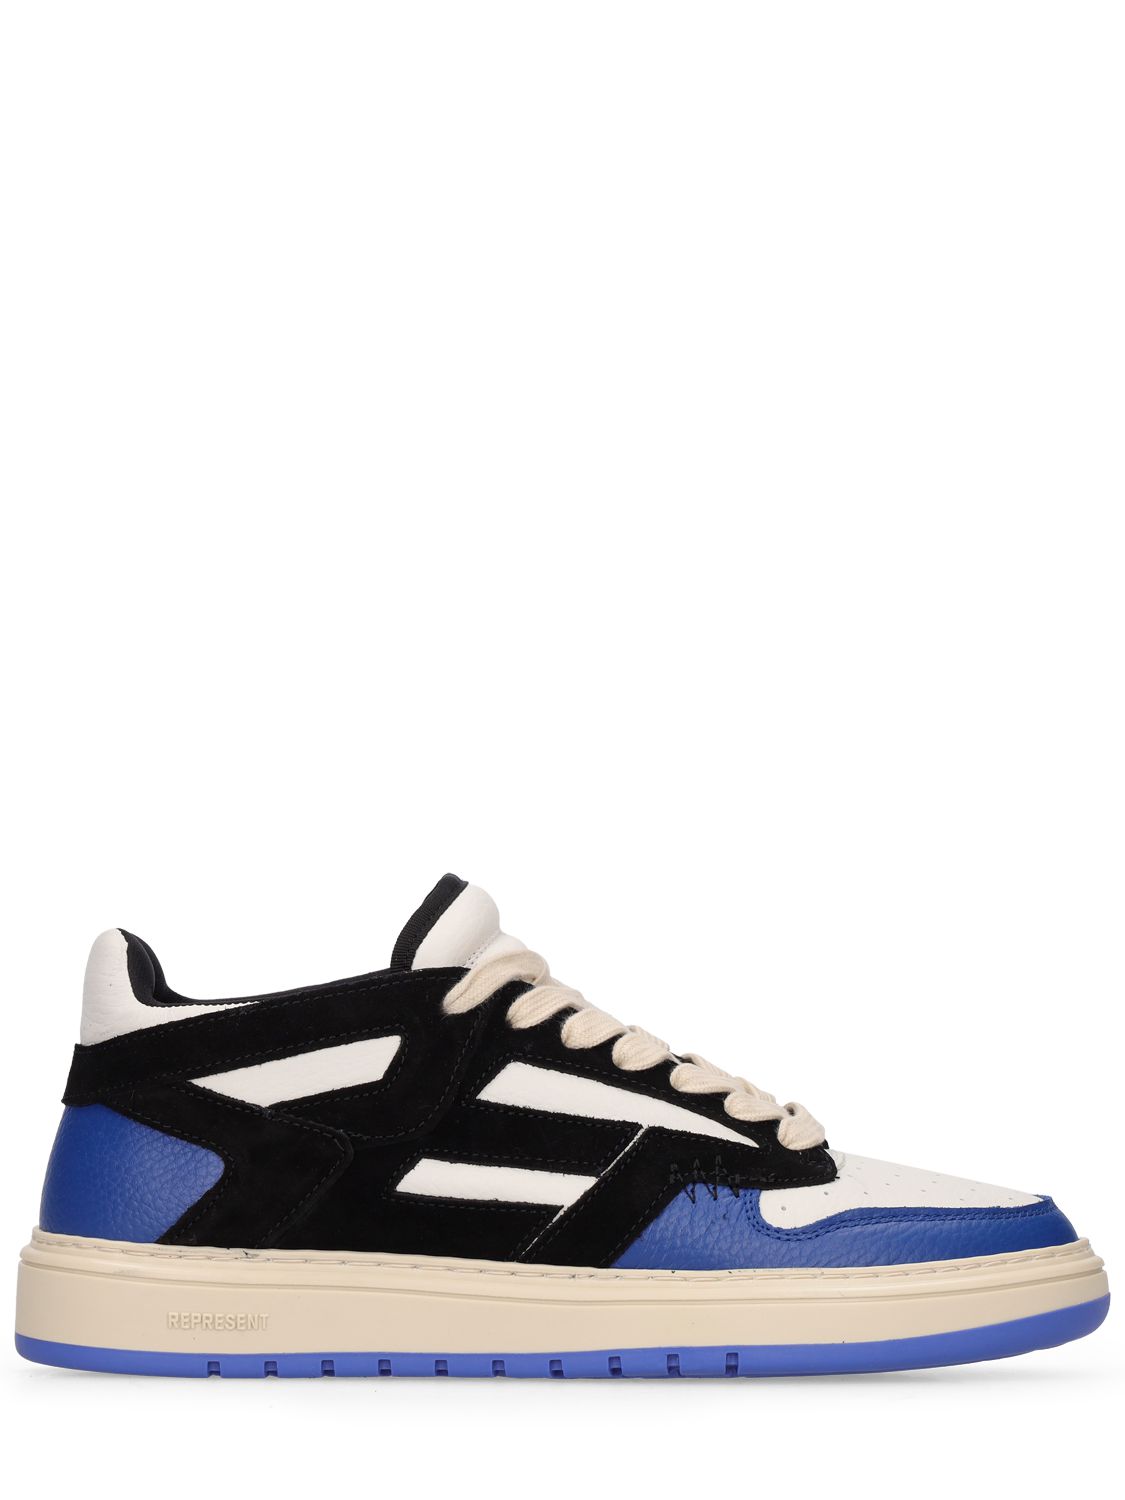 Reptor Low Leather Sneakers